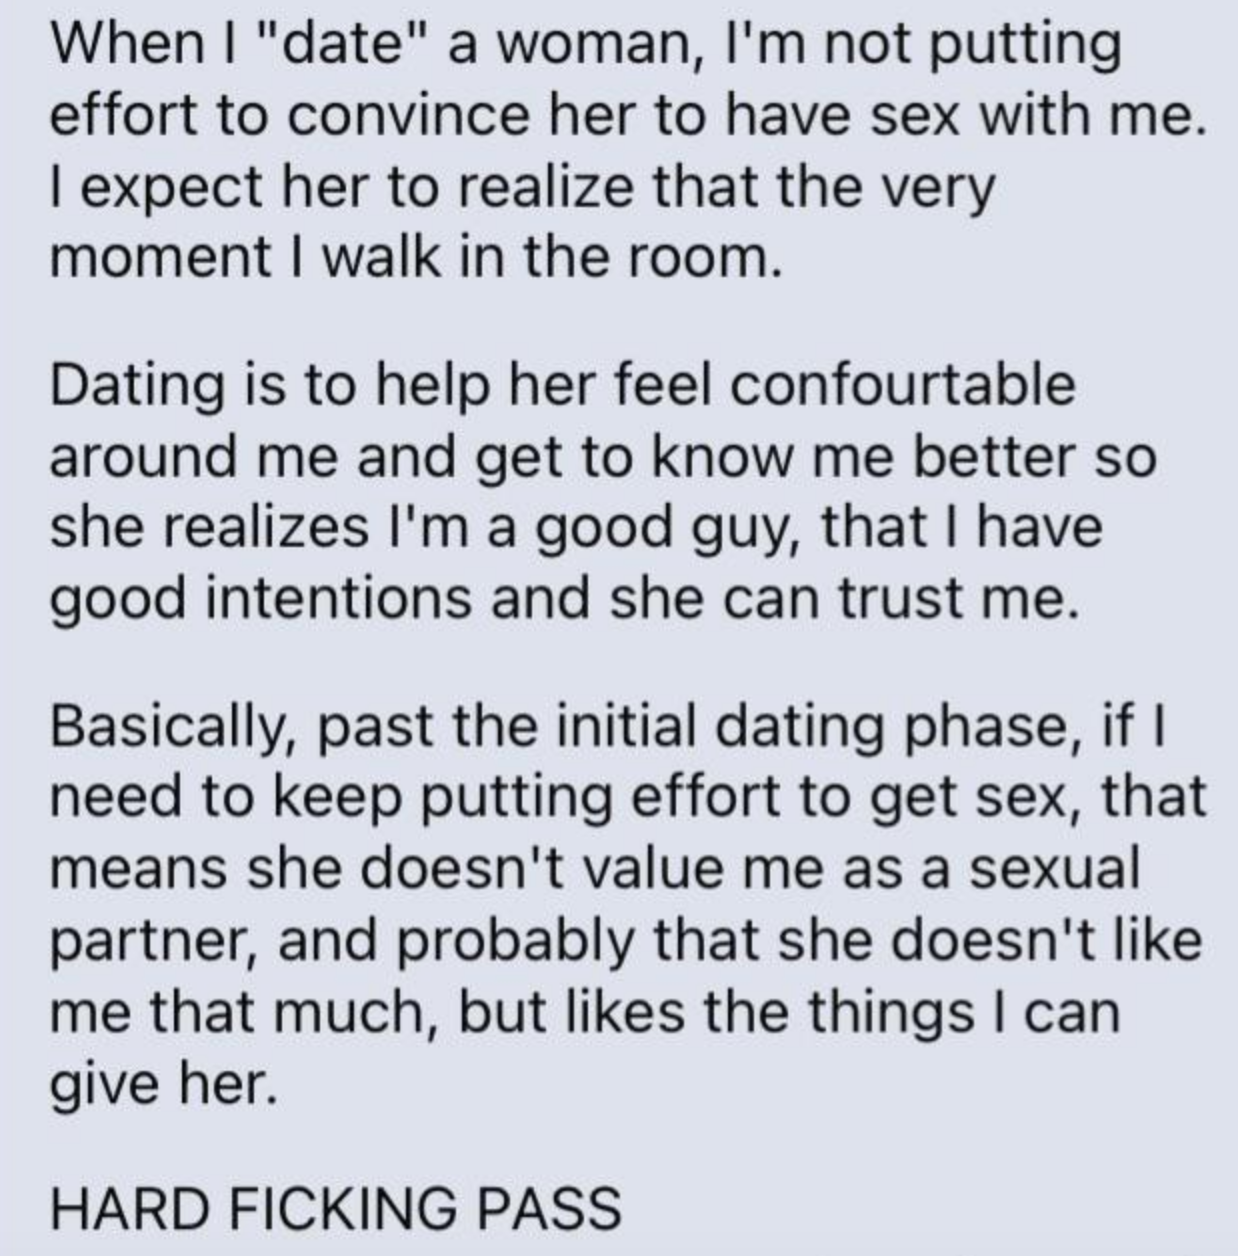 &quot;When I &#x27;date&#x27; a woman, I&#x27;m not putting effort to convince her to have sex with me. I expect her to realize that the very moment I walk in the room&quot;